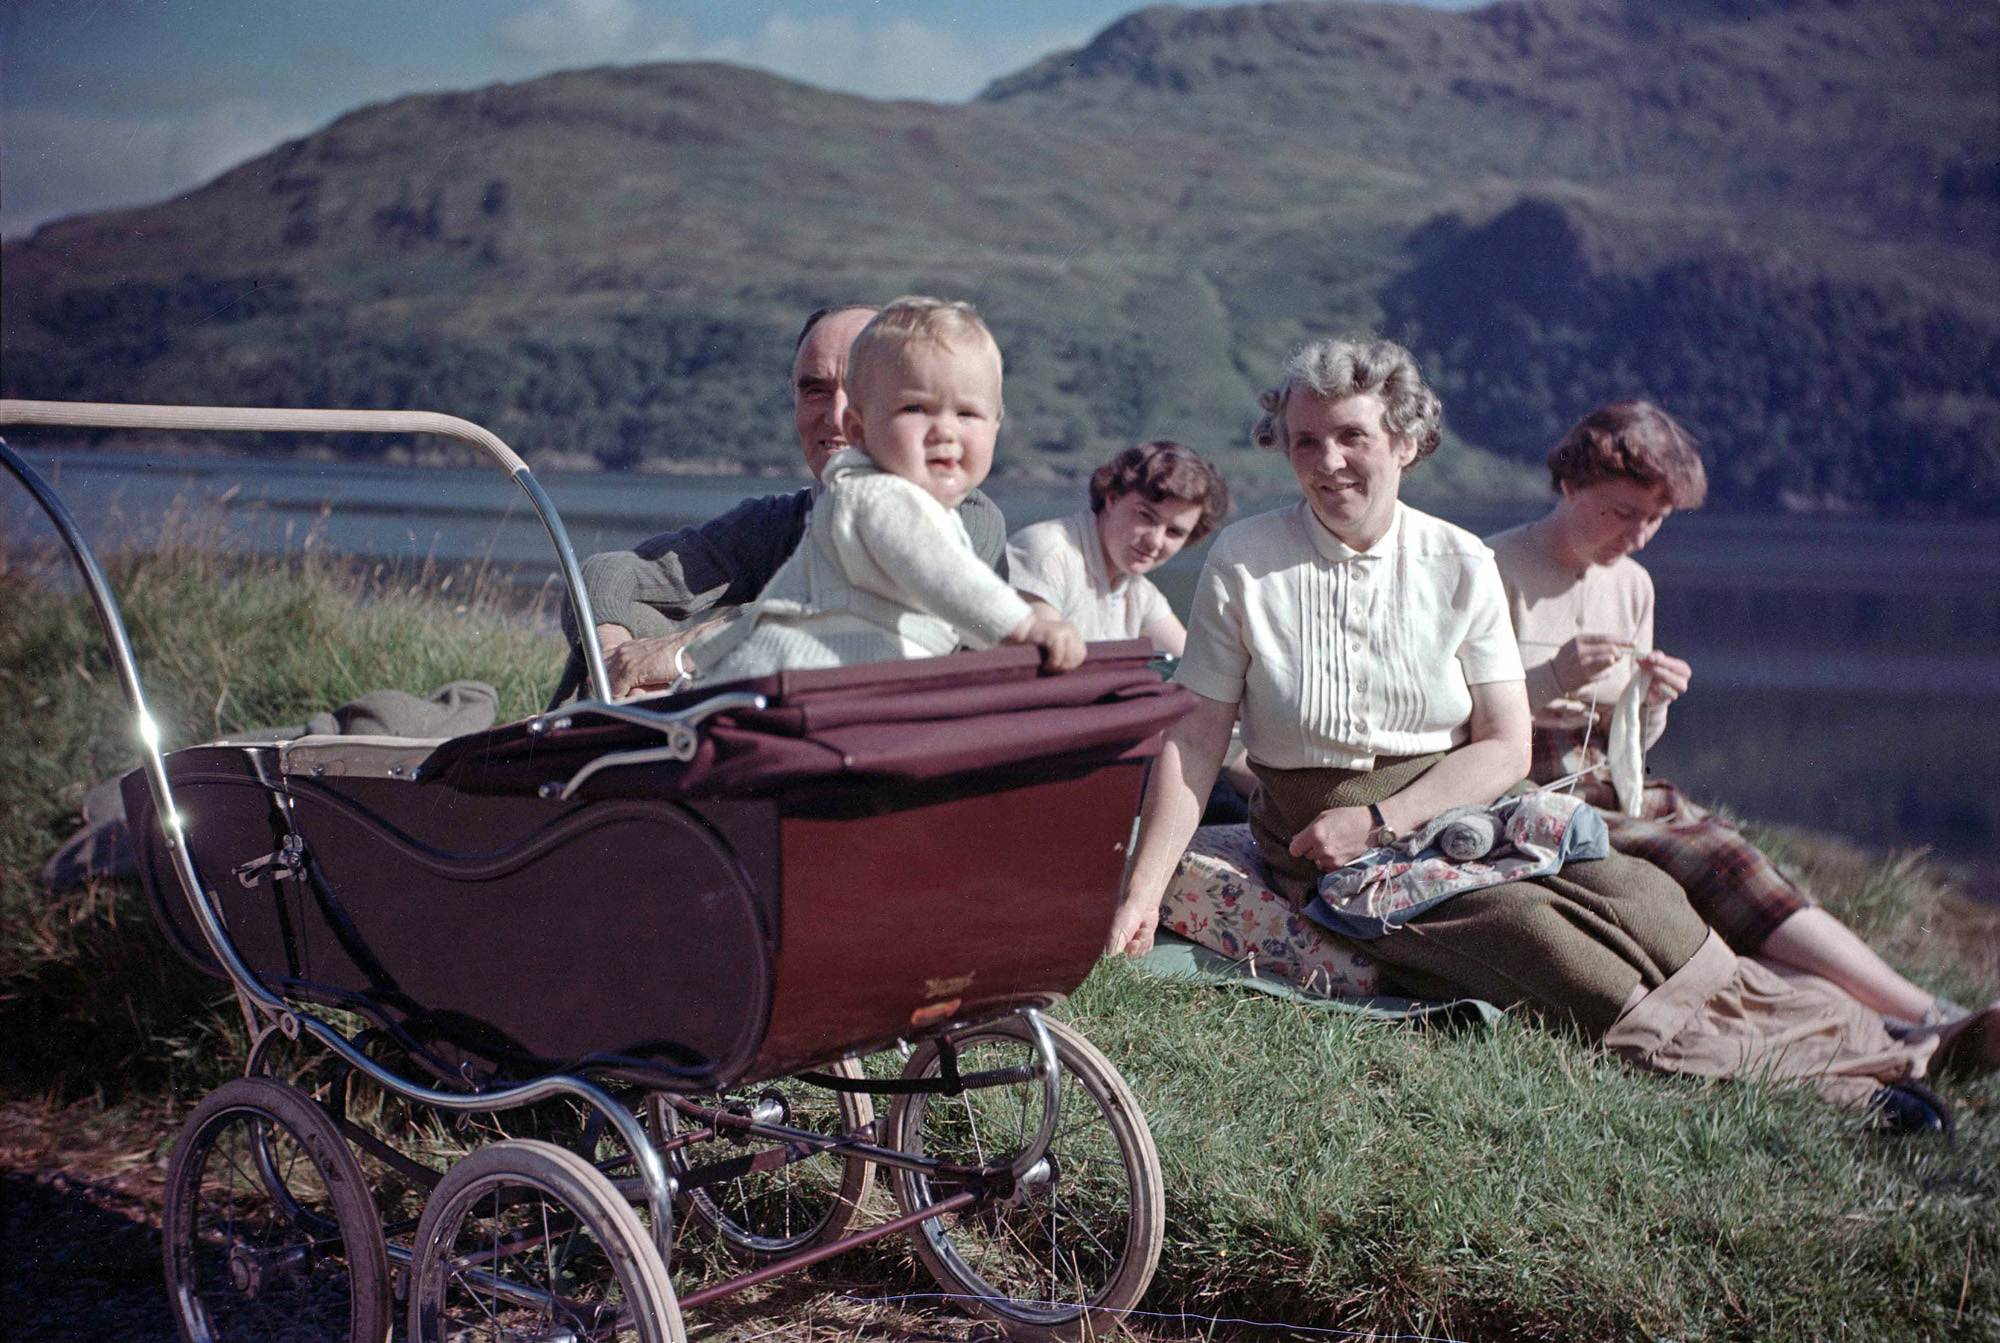 Near Letterfearn, Wester Ross, Scotland, 1954. My mother is knitting, my grandparents are also in shot. View full size.